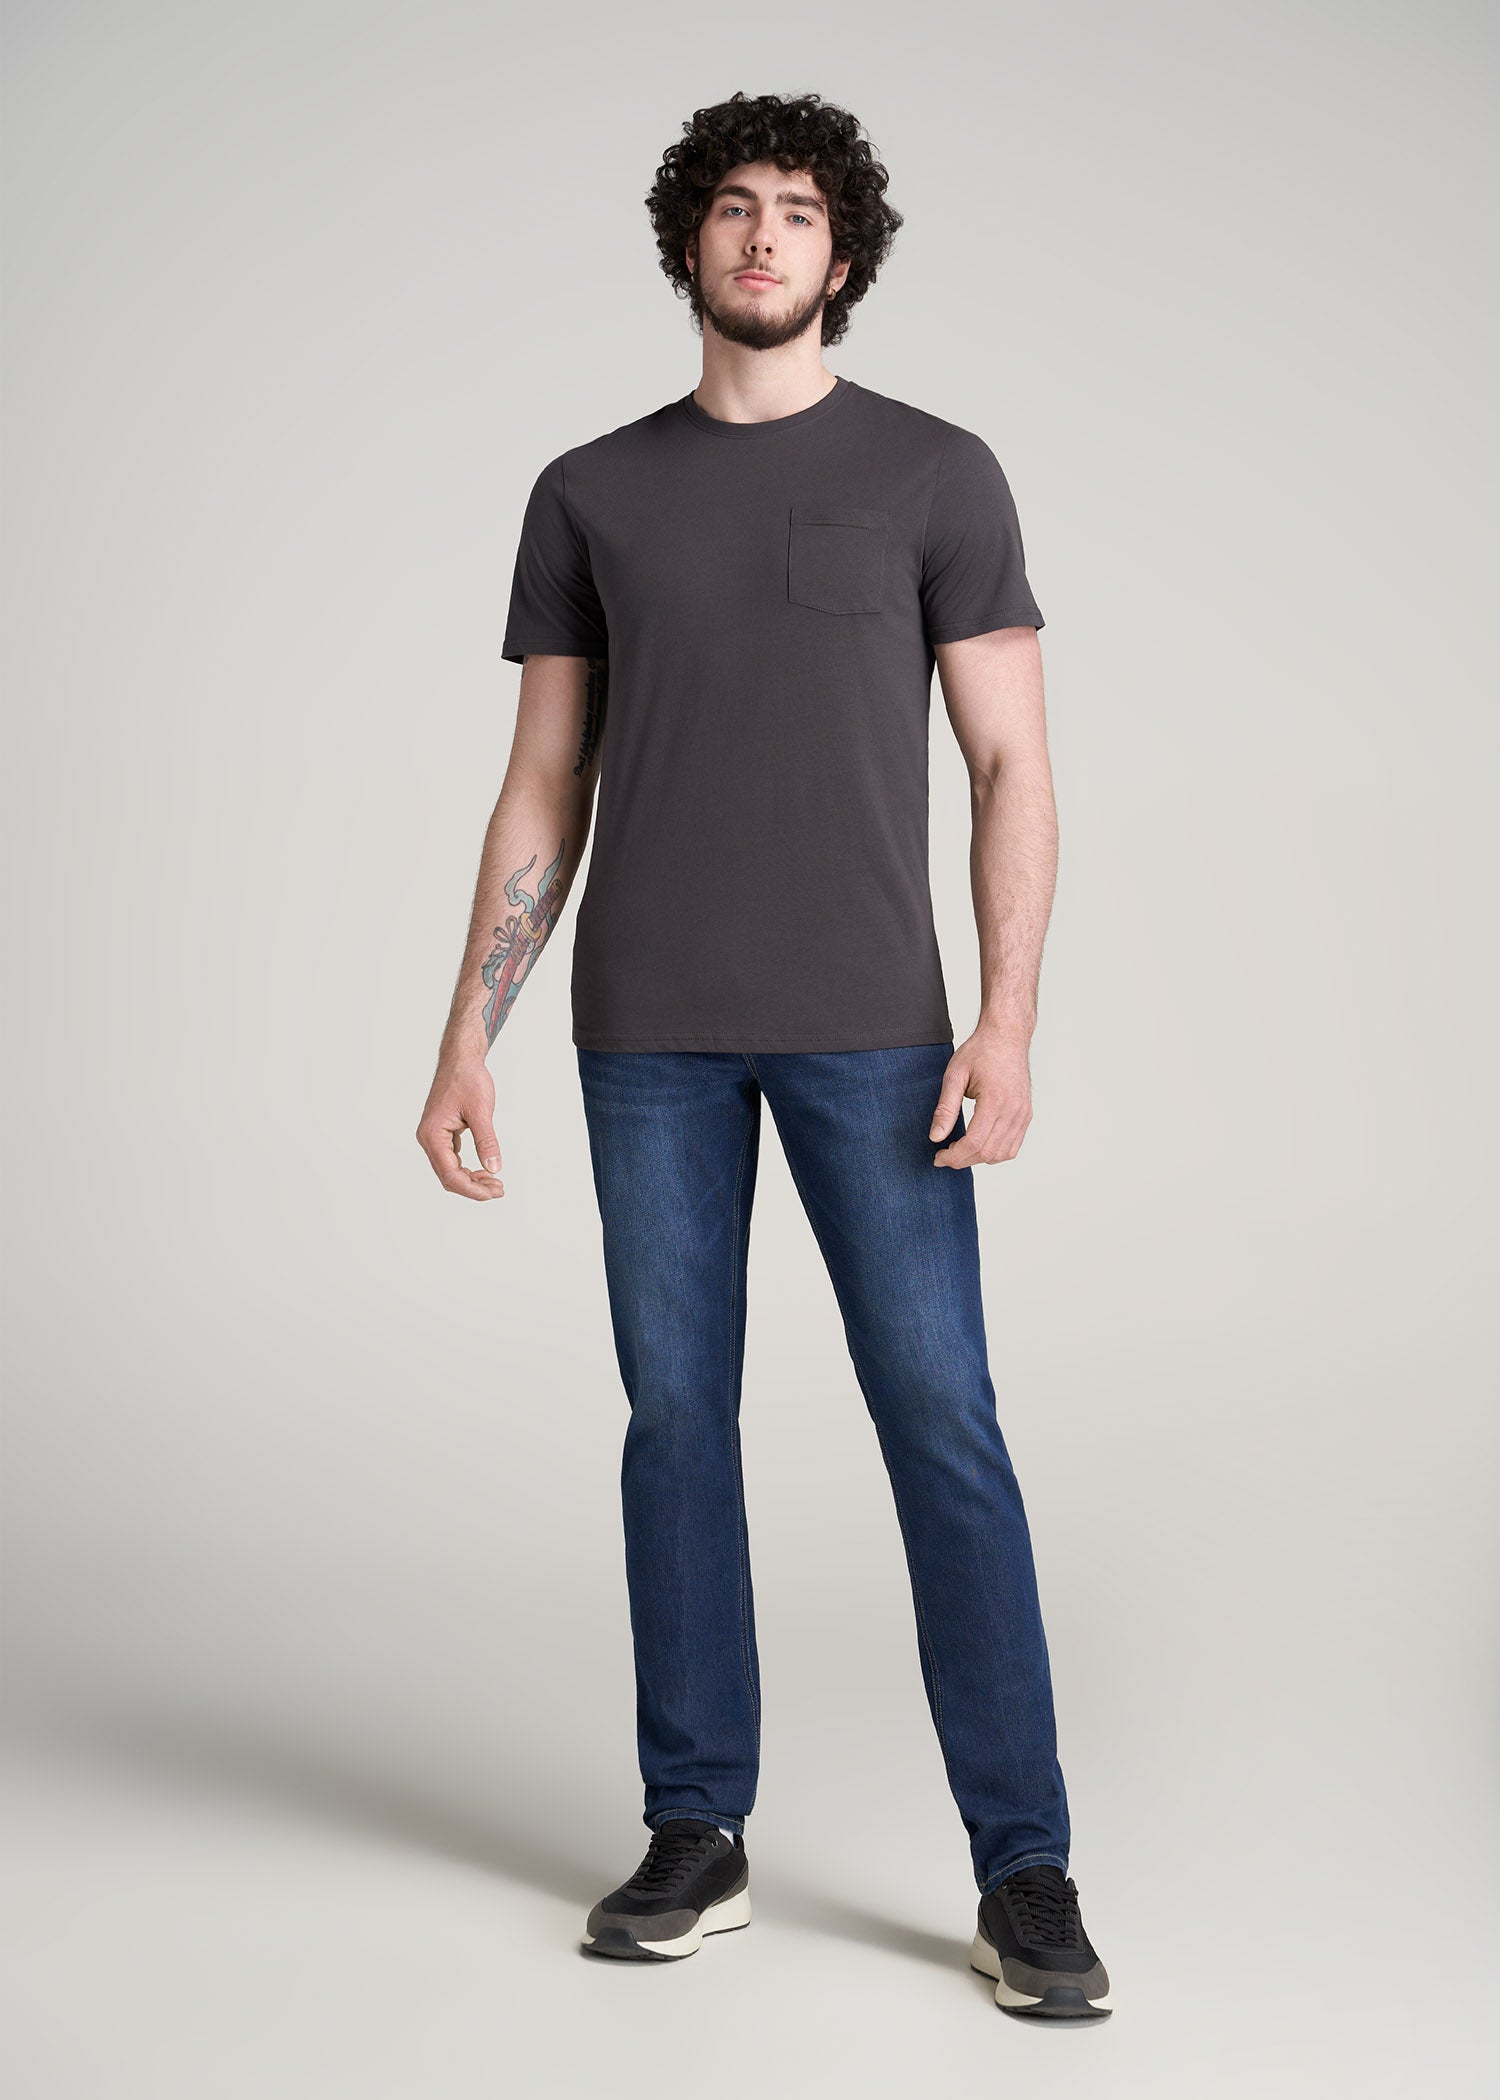     American-Tall-Men-Everyday-Pocket-Tee-Charcoal-full